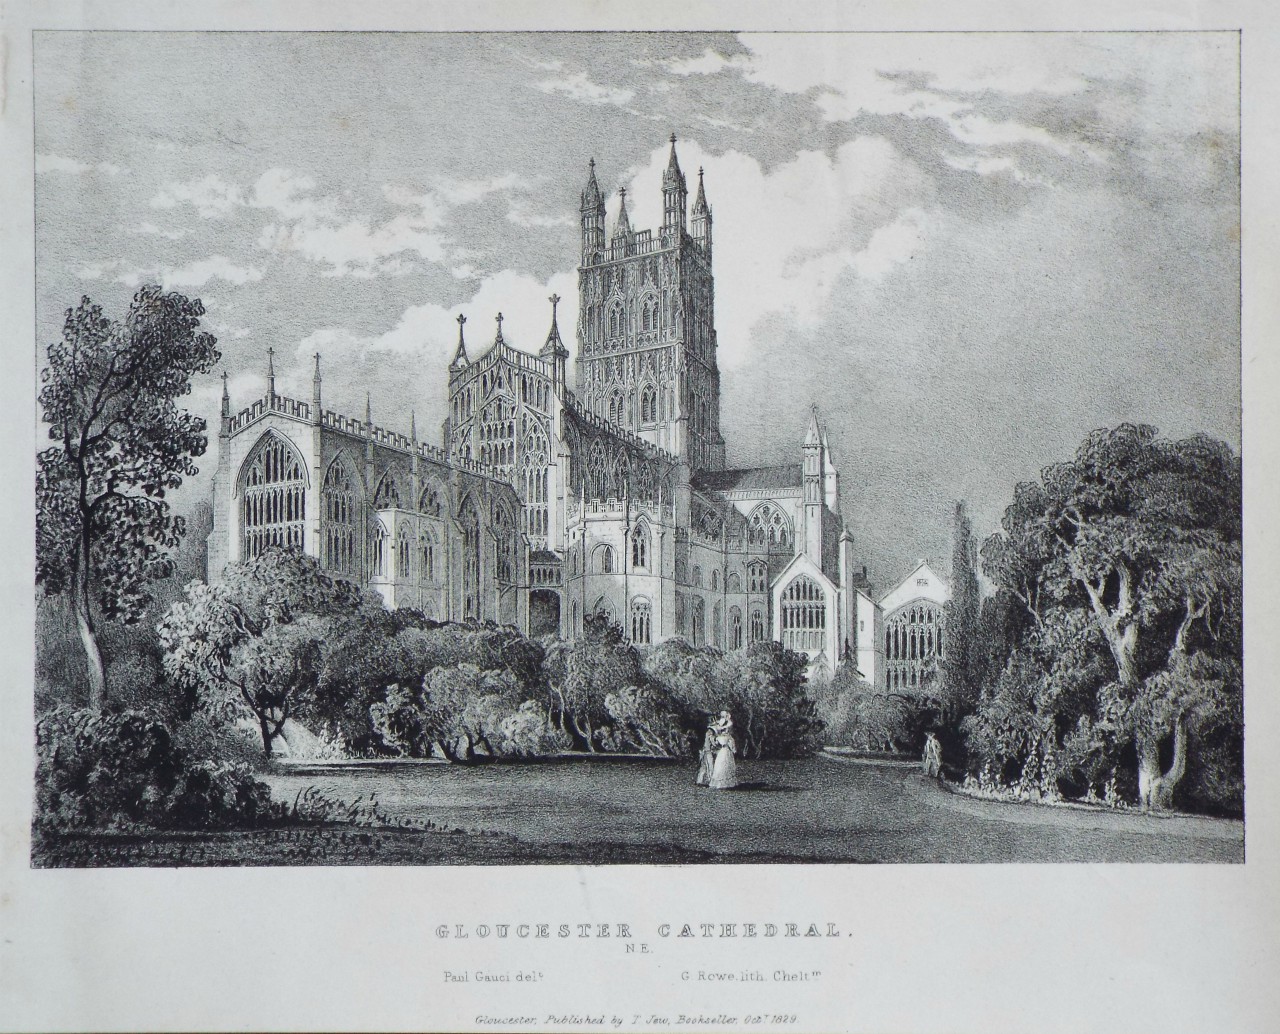 Lithograph - Gloucester Cathedral. N.E. - Rowe